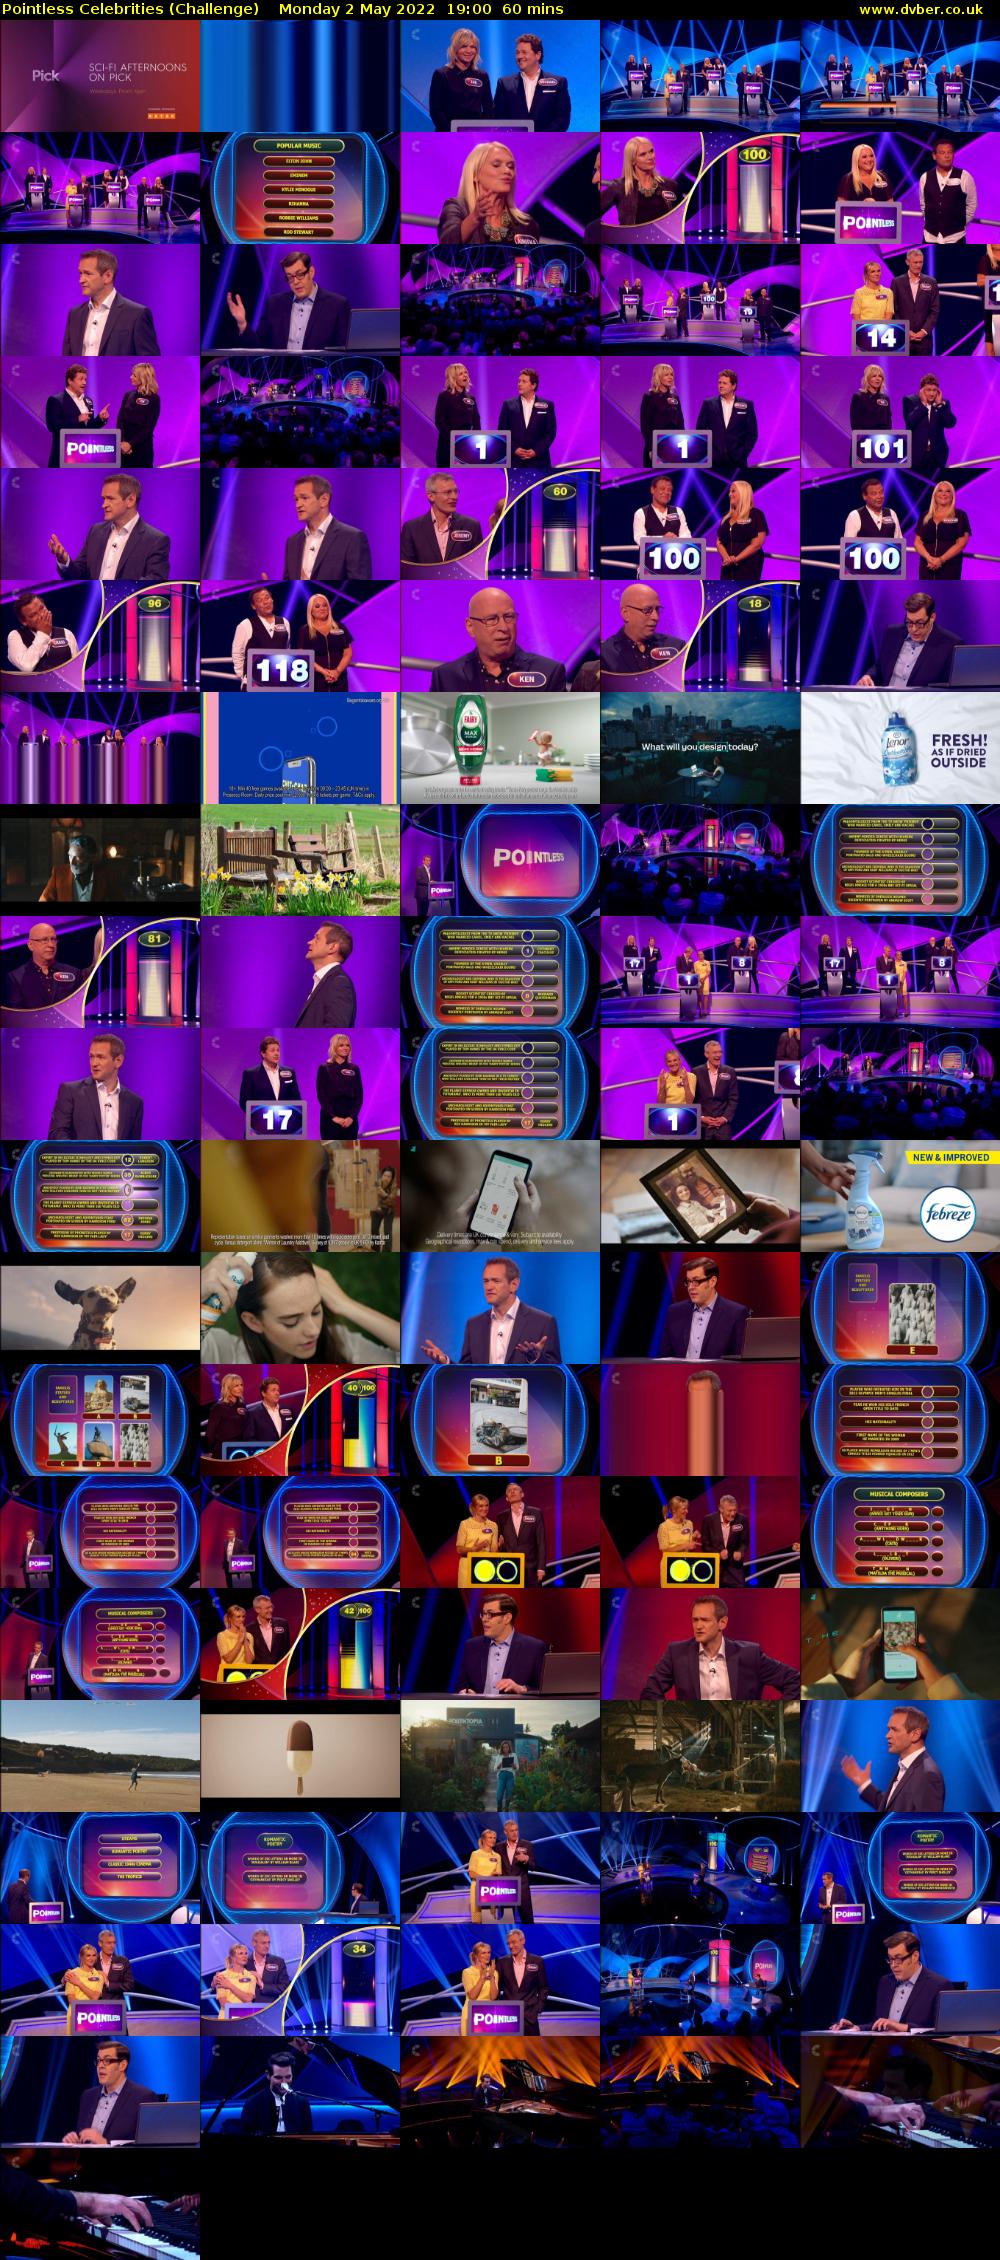 Pointless Celebrities (Challenge) Monday 2 May 2022 19:00 - 20:00